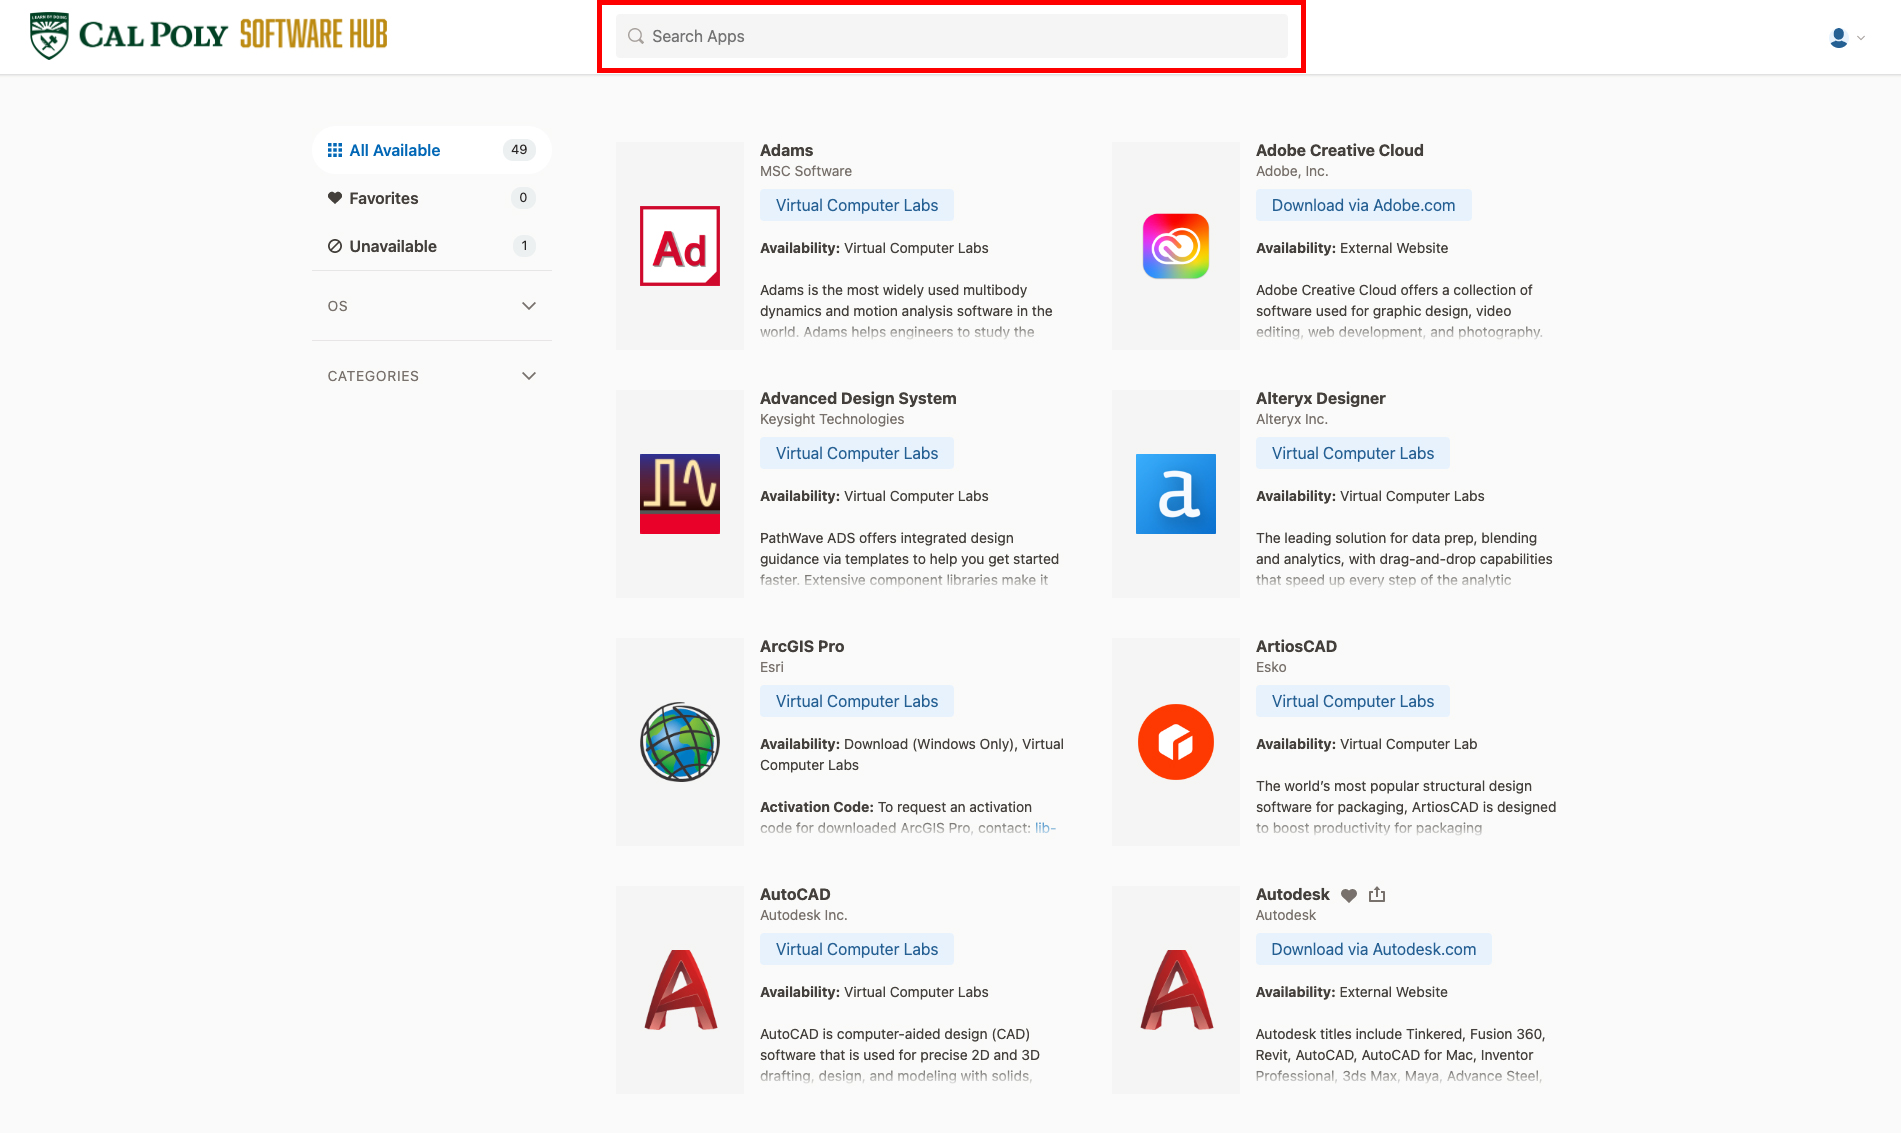 Search Apps field highlighted in red.